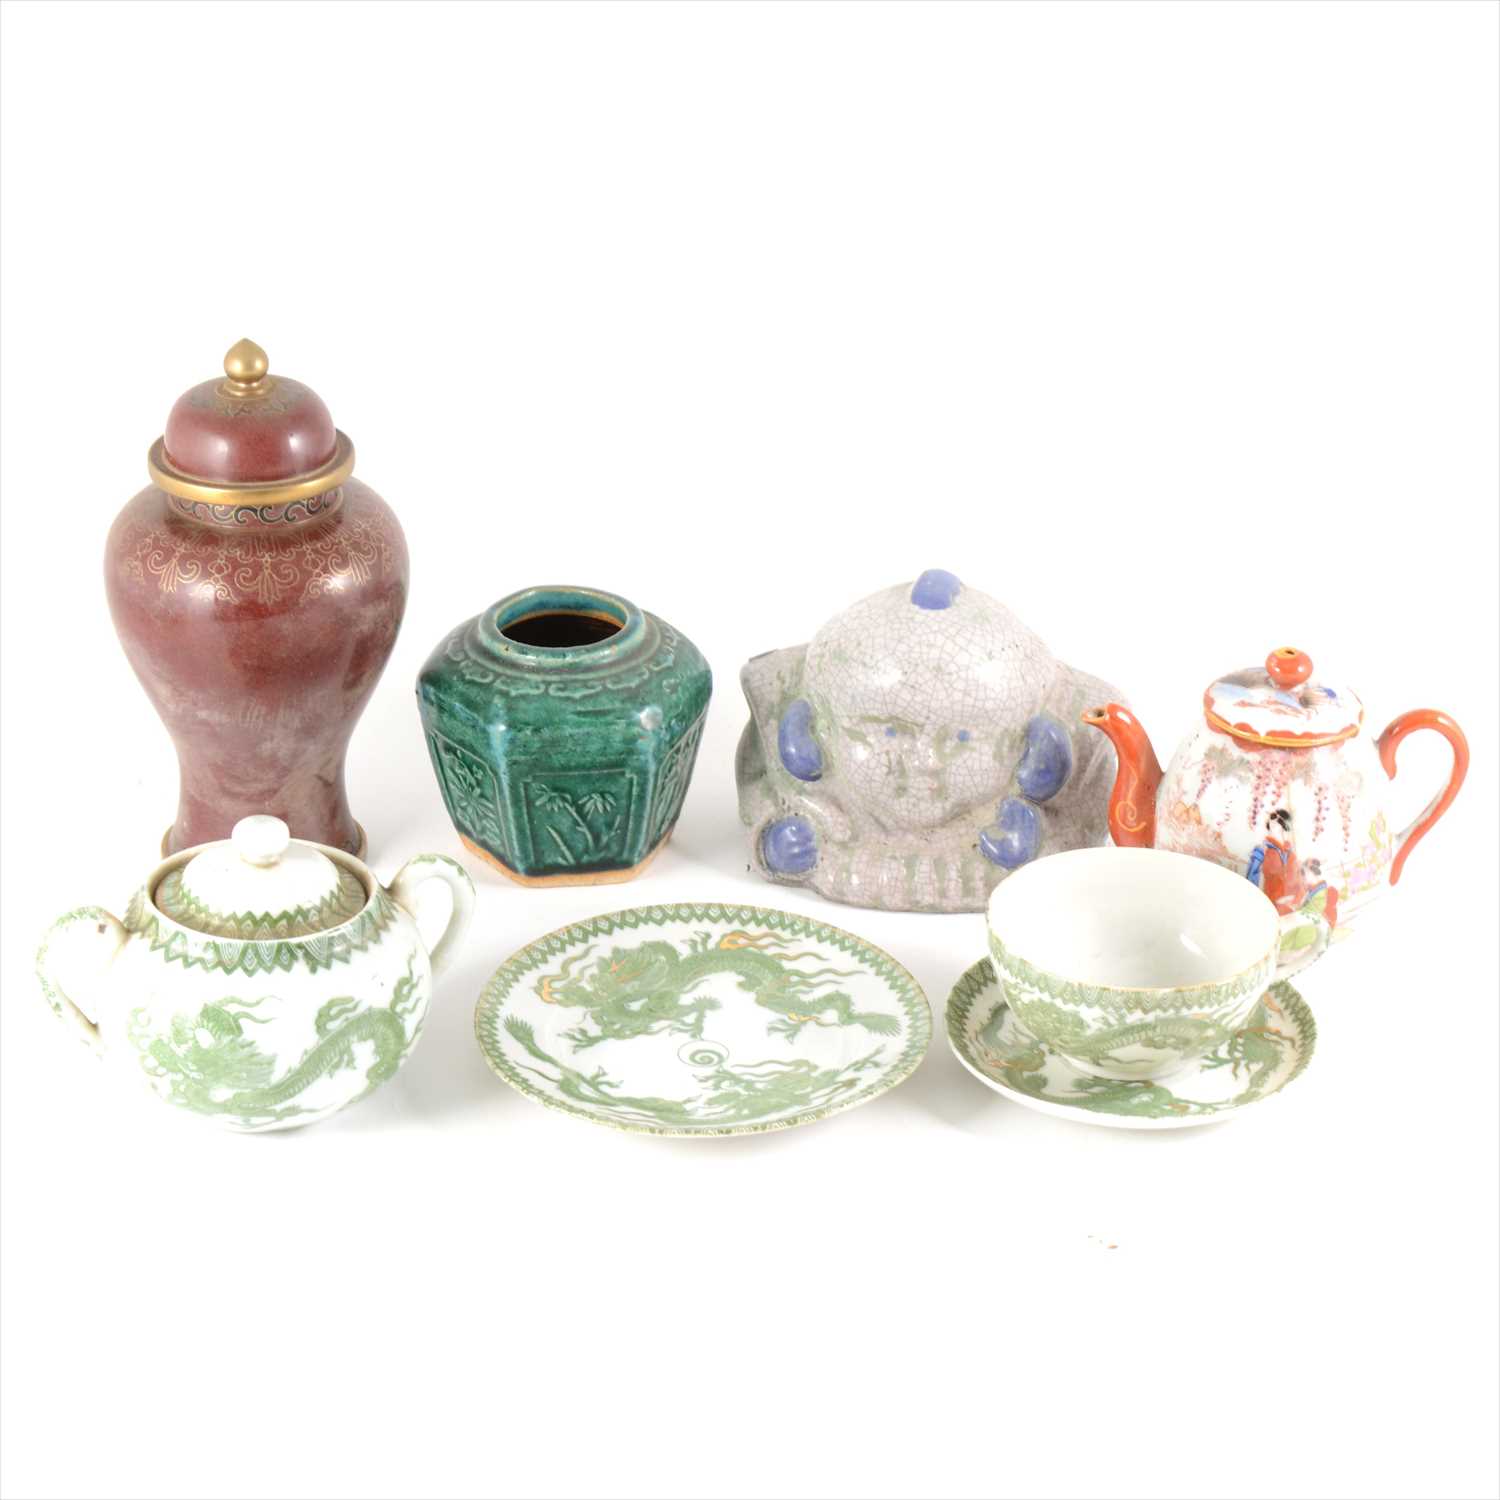 Lot 53 - Small selection of Asian ceramics and a cloisonné vase and cover